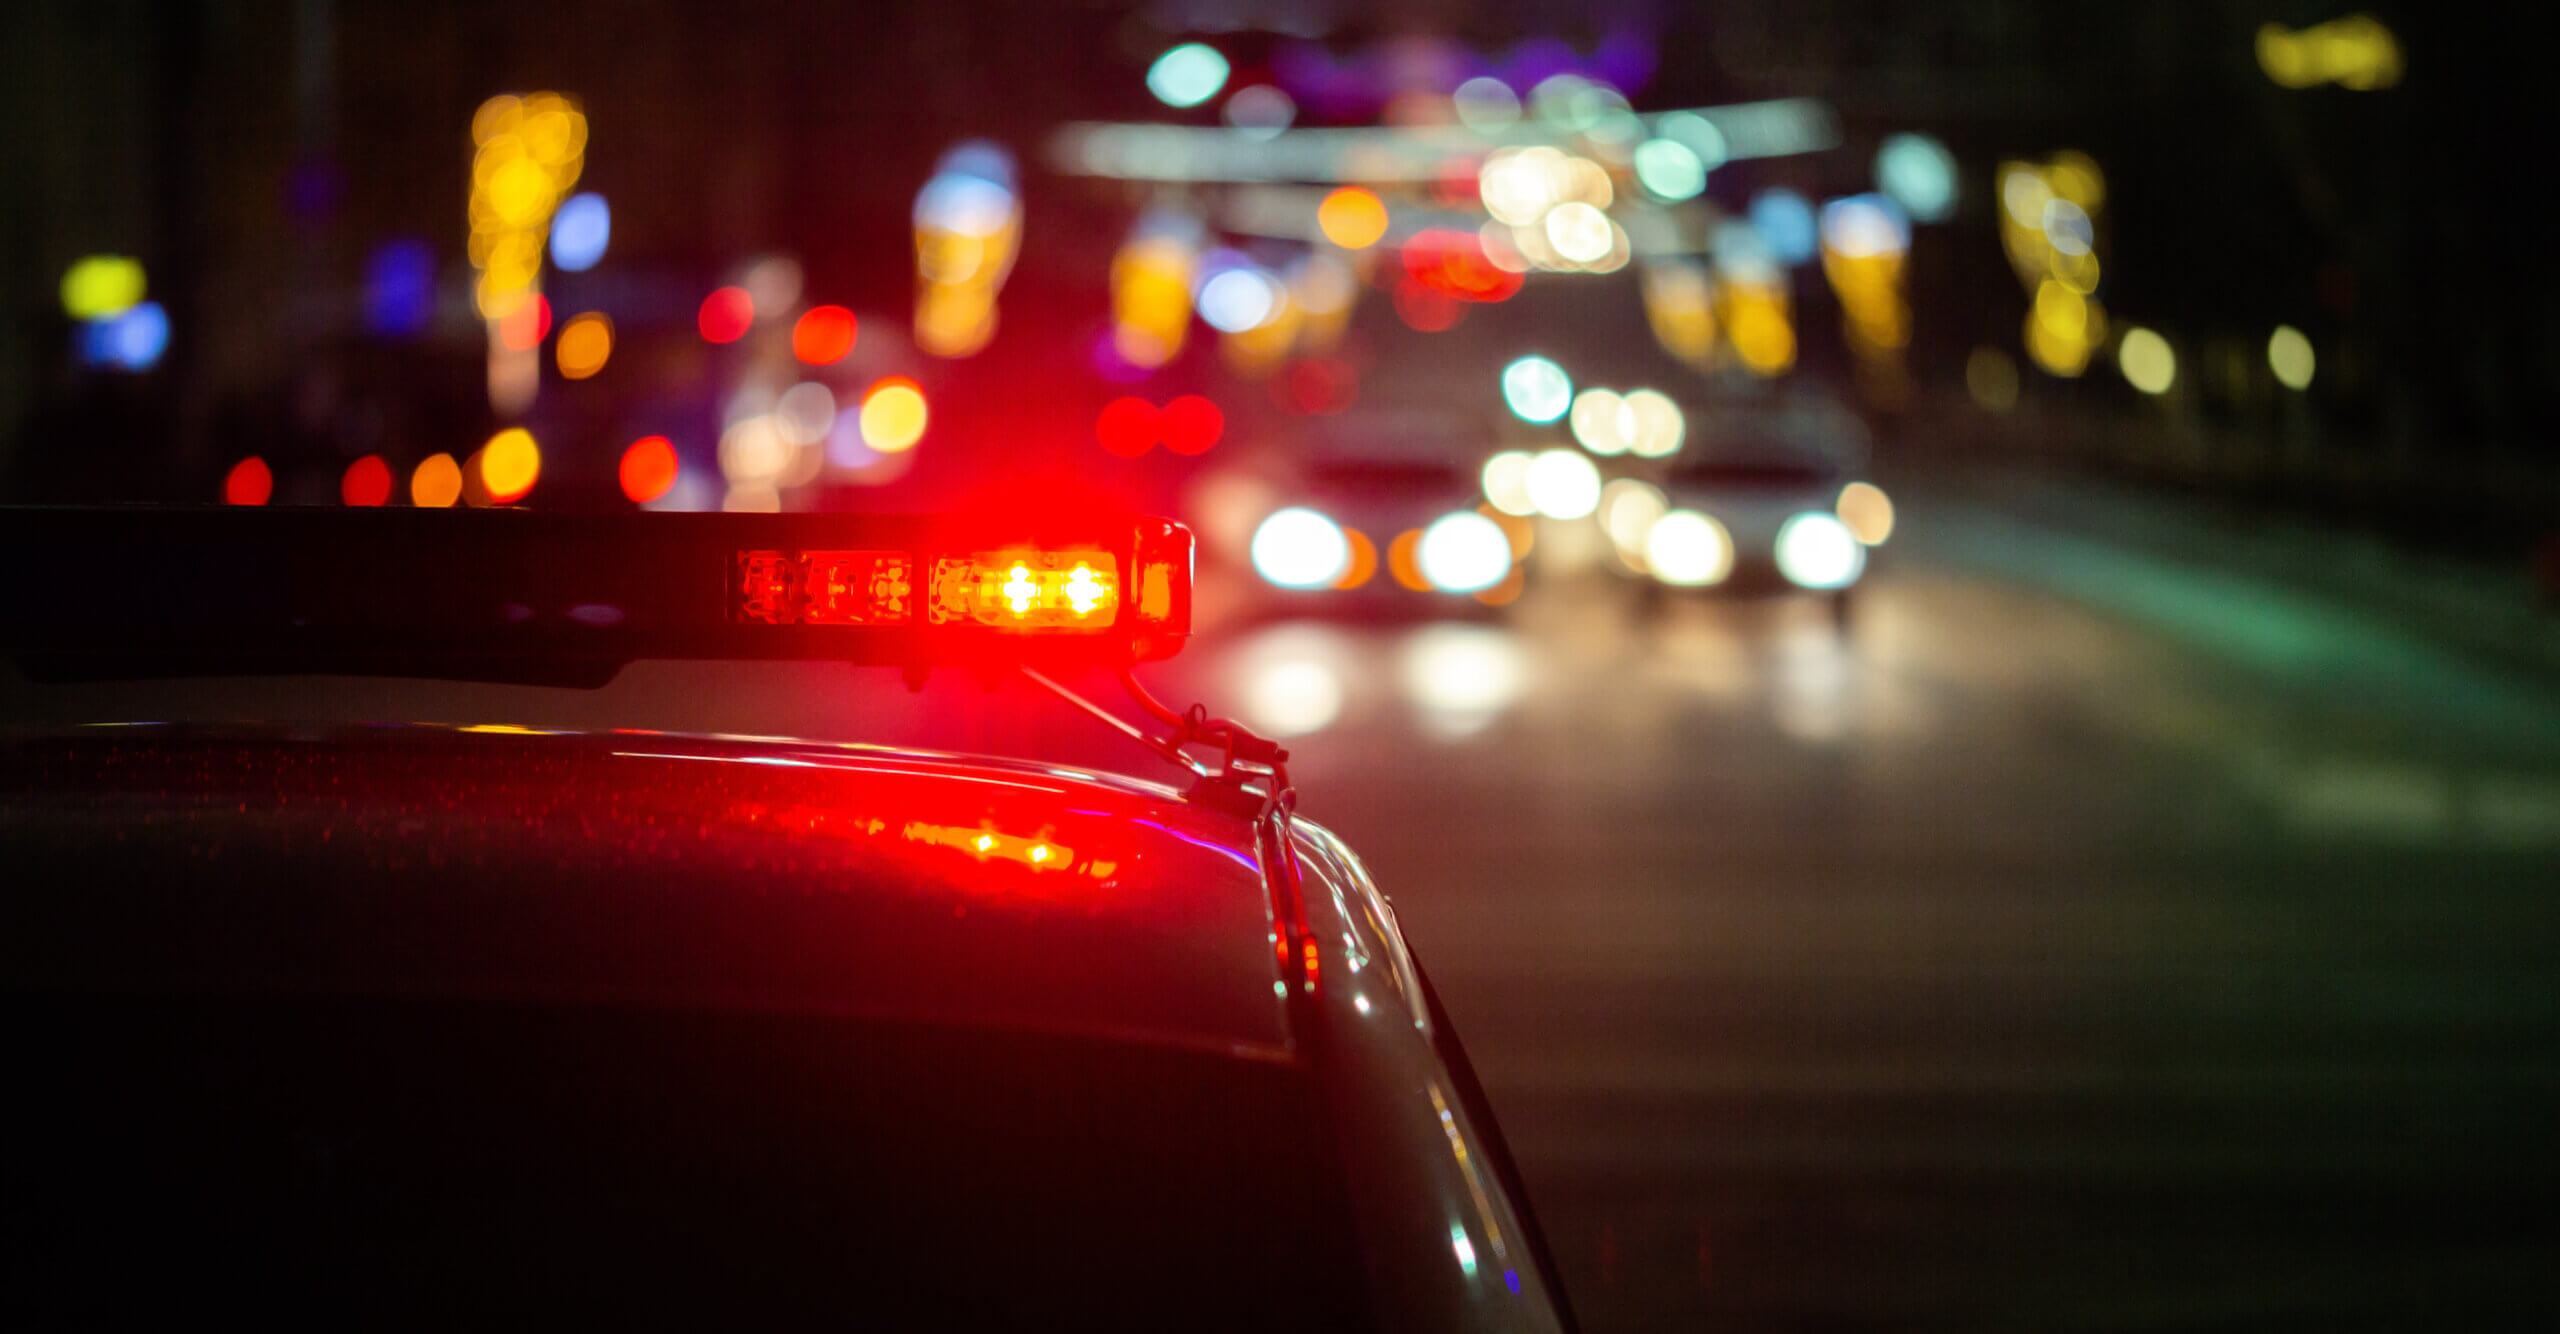 police car lights at night in city with selective focus and bokeh background blur